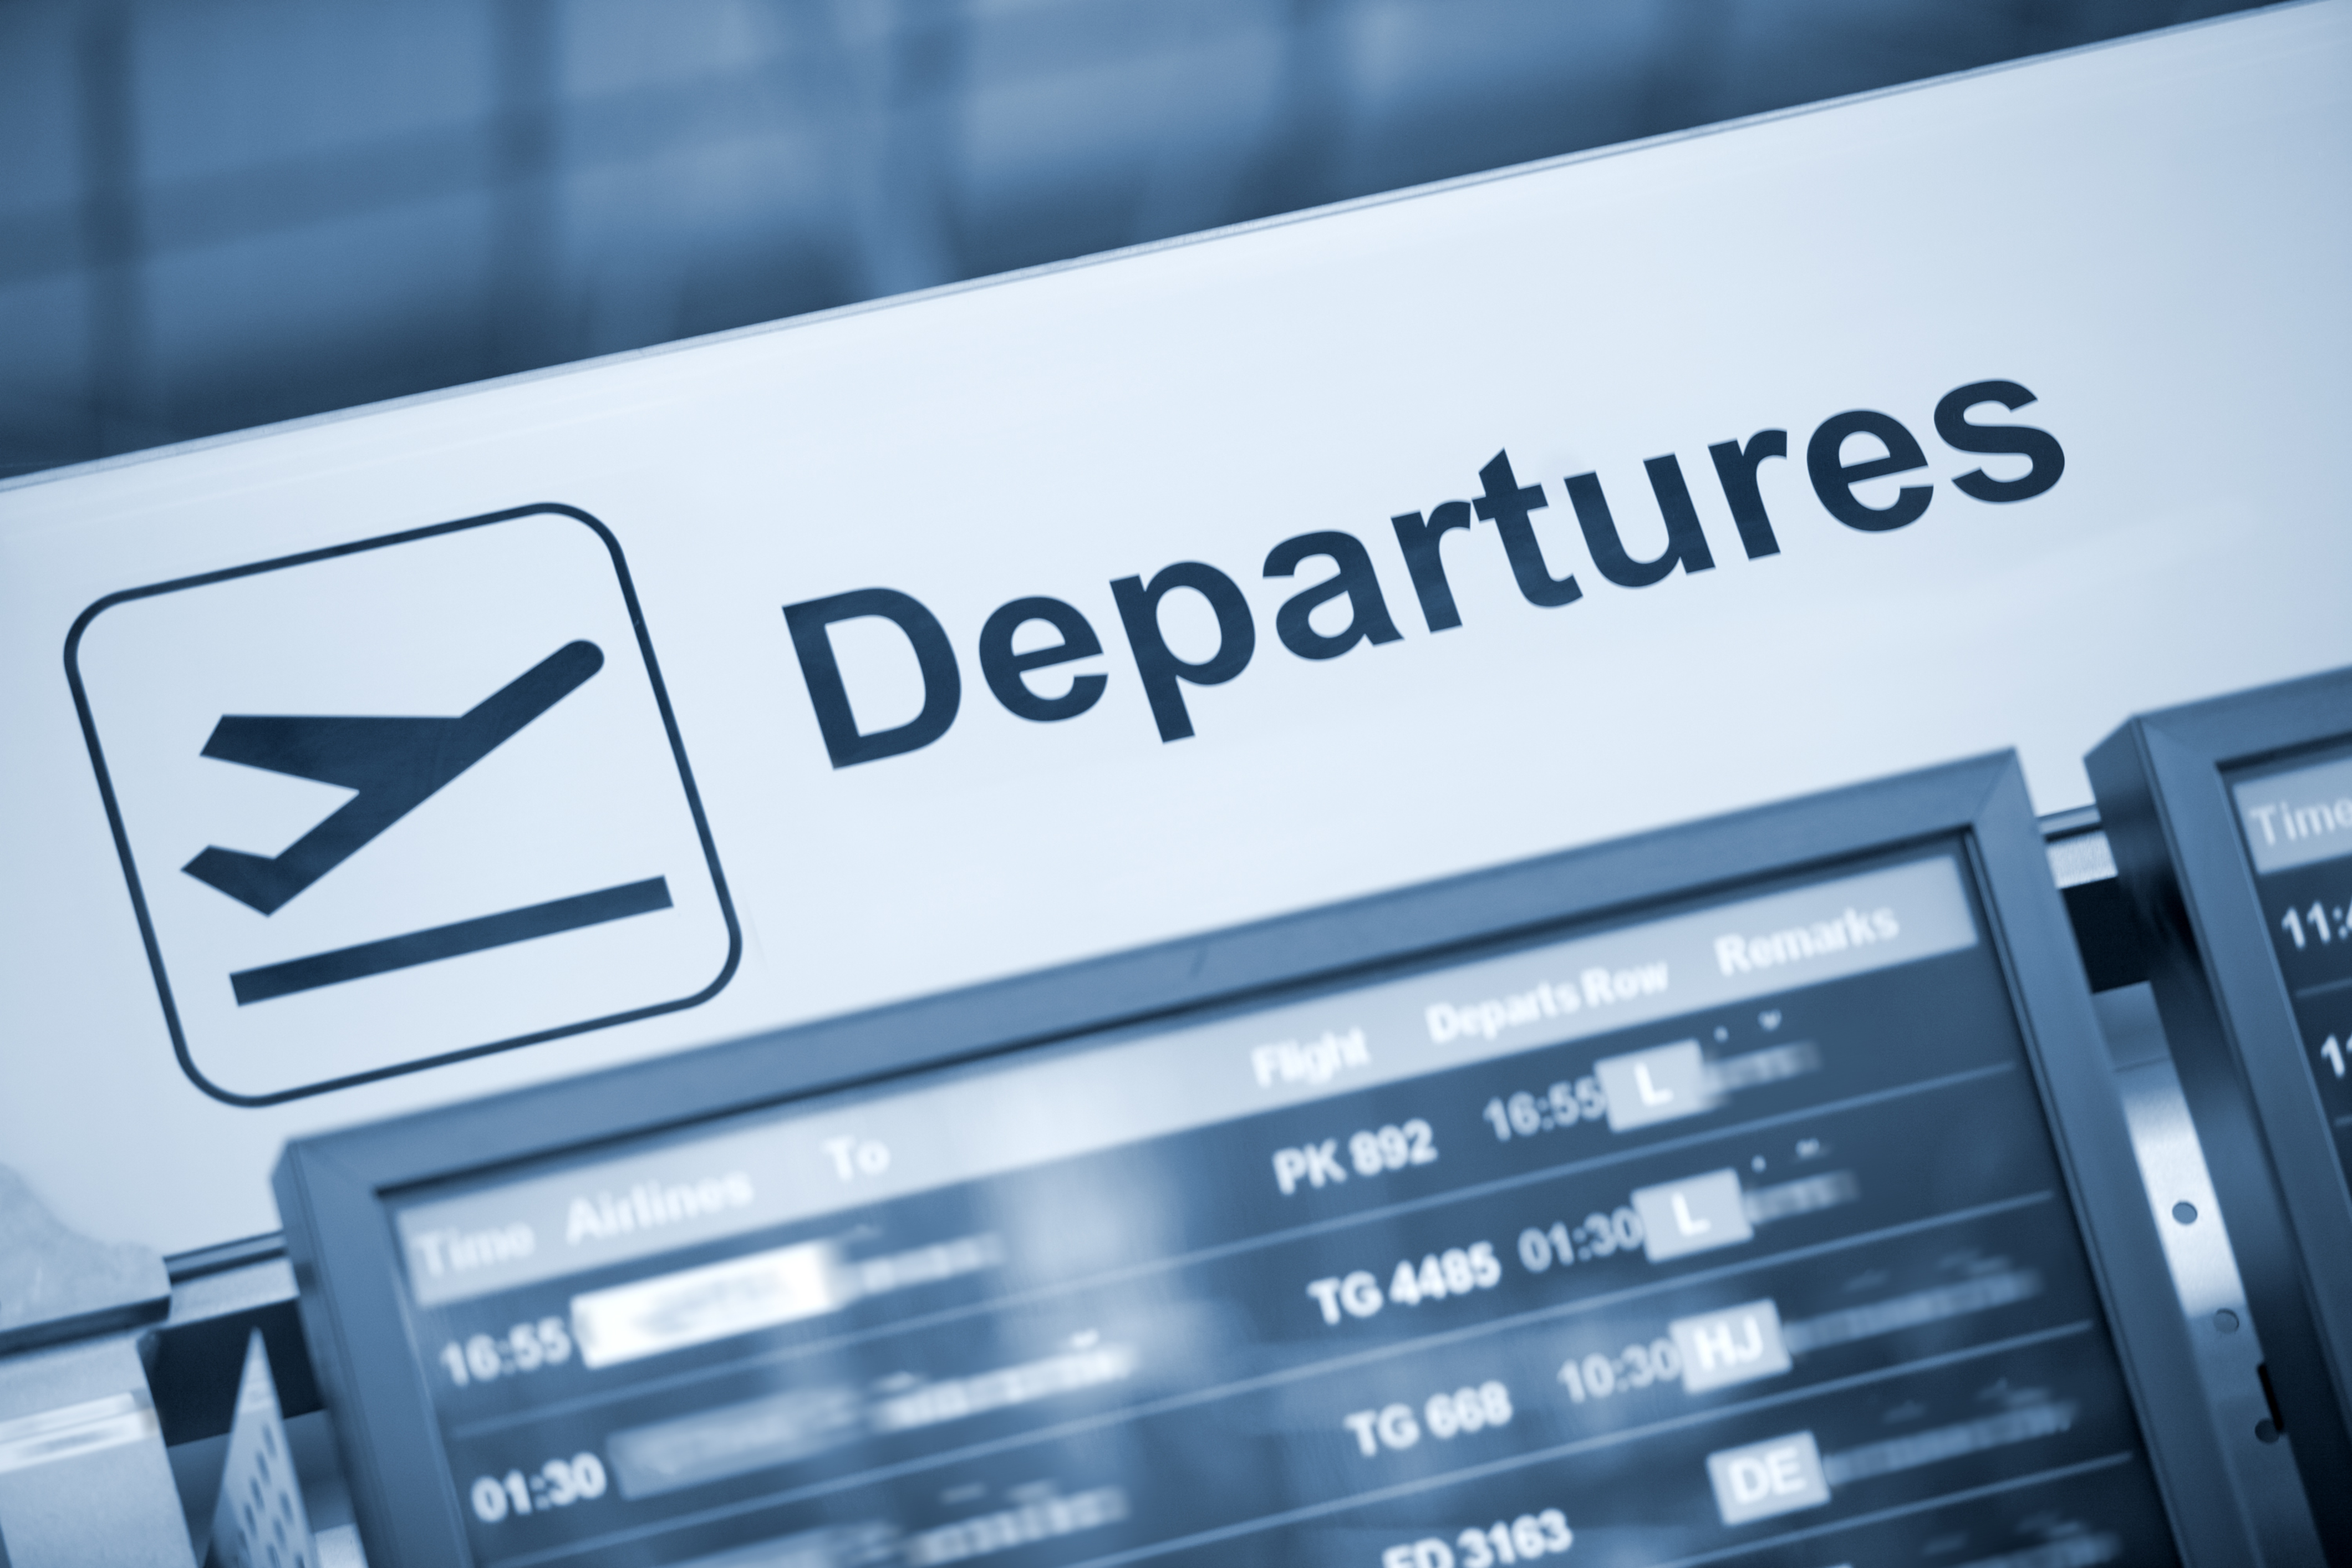 A departures sign in an airport